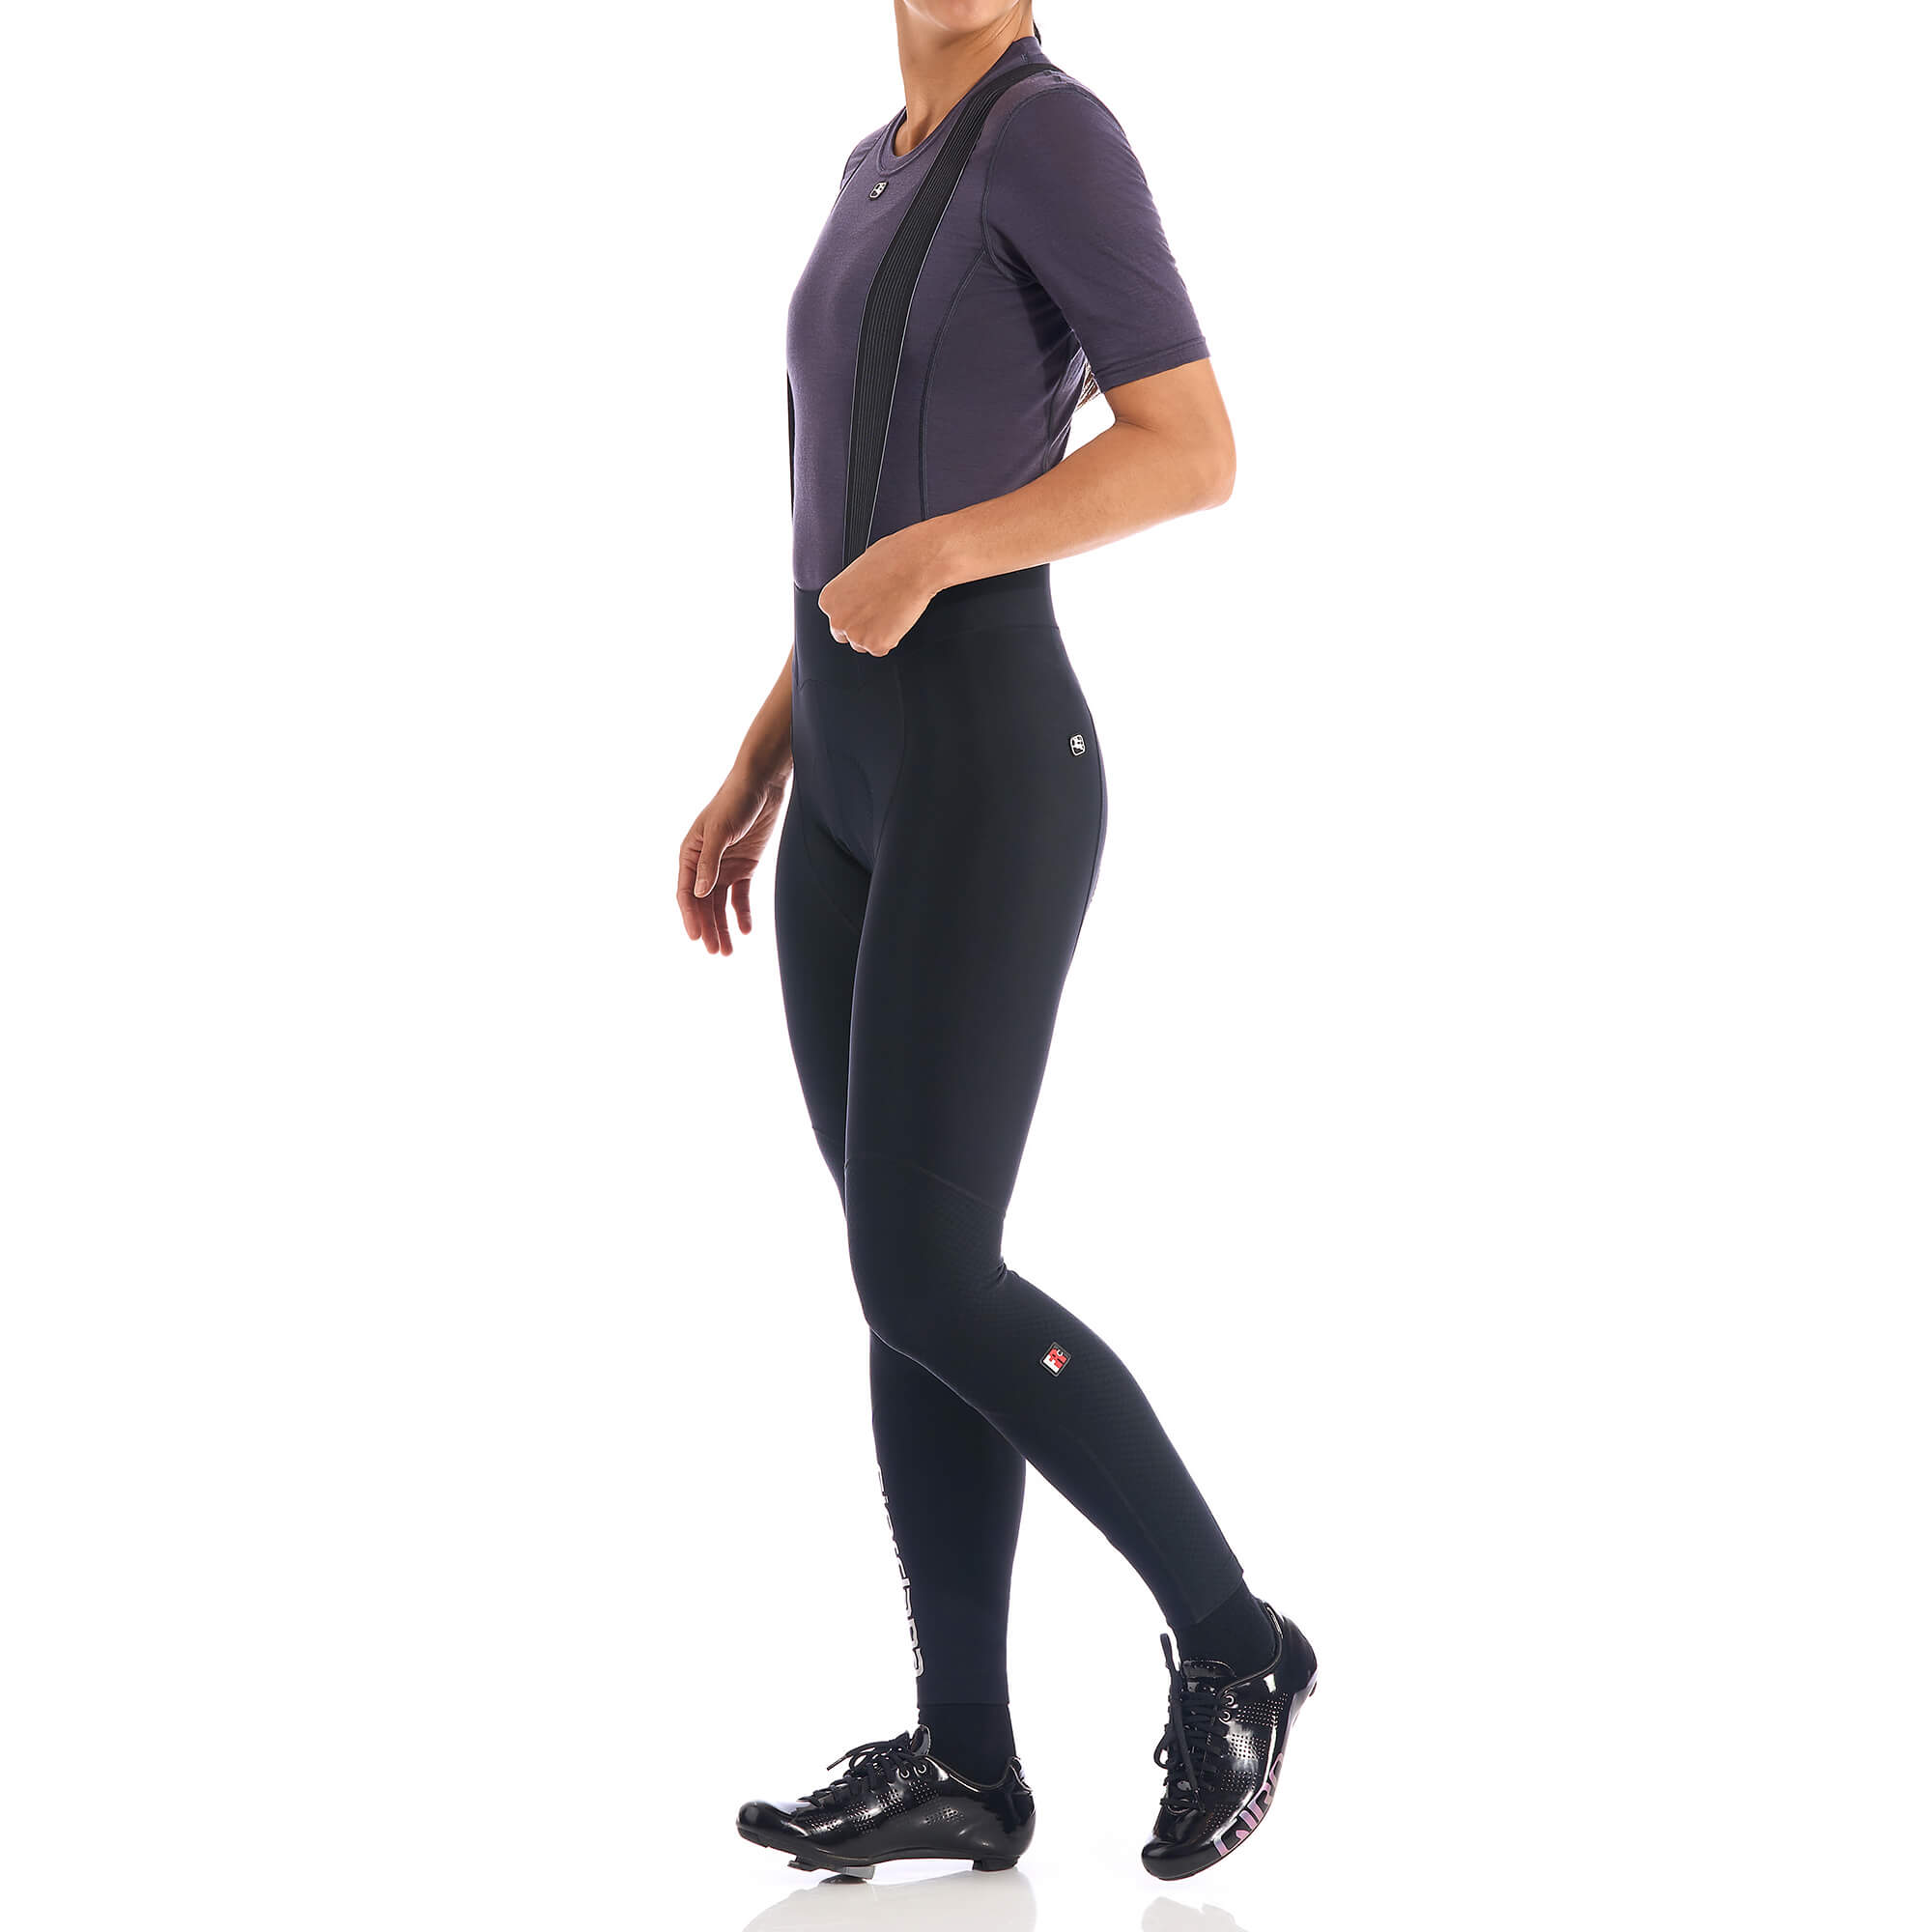 Giordana Silverline Thermal Cycling Tights w/ No Pad – Classic Cycling